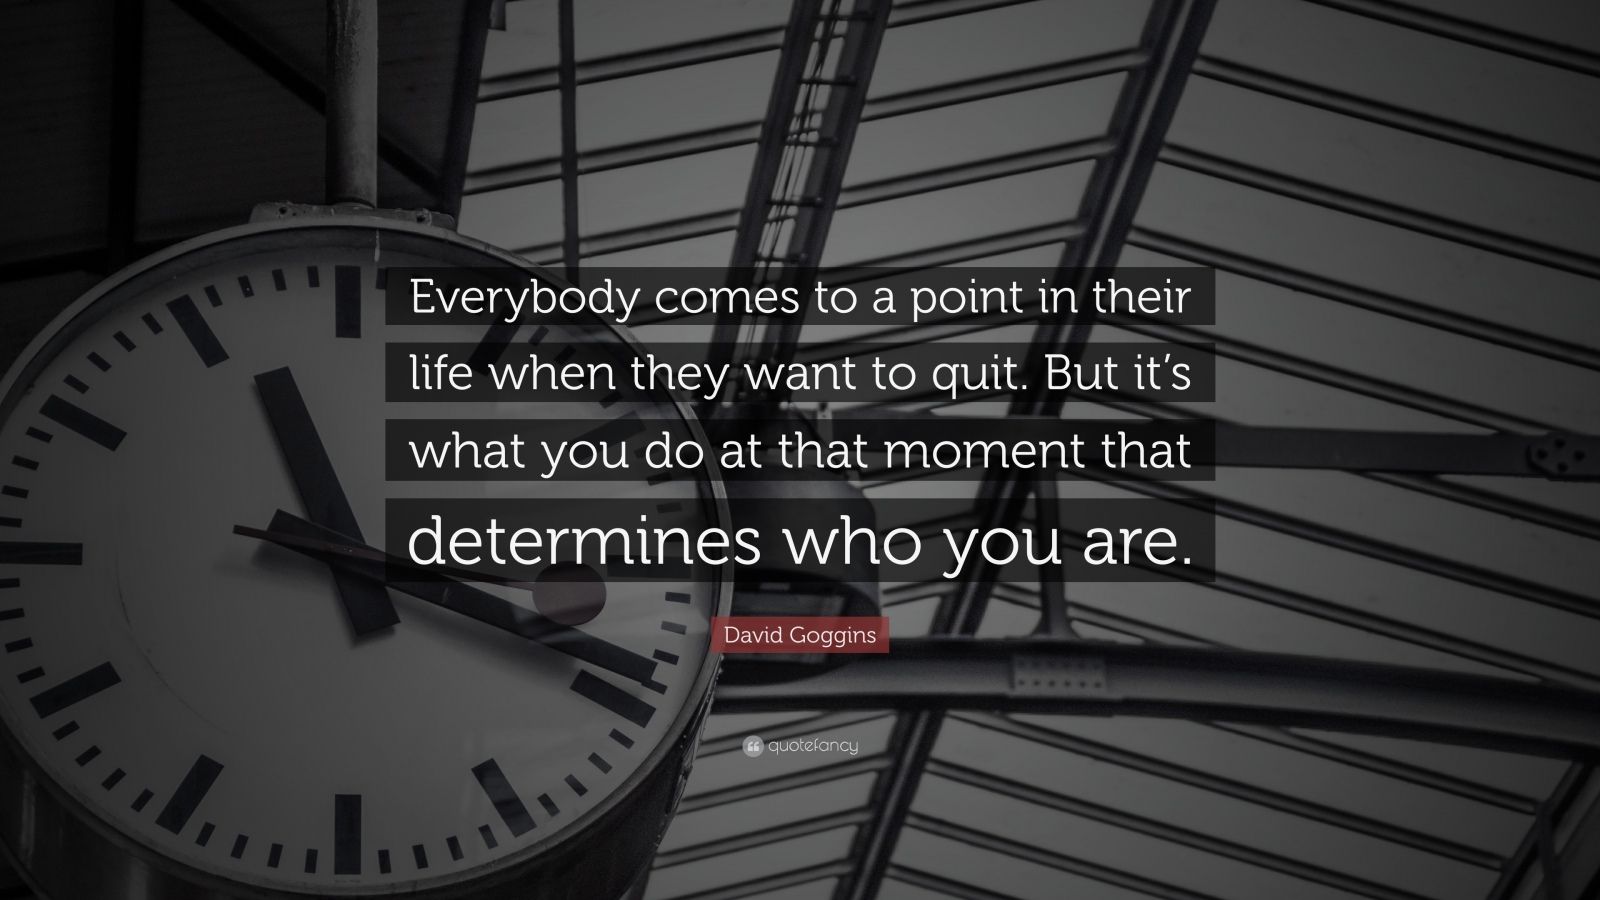 David Goggins Quote: “Everybody comes to a point in their life when they  want to quit. But it's what you do at that moment that determines who...”